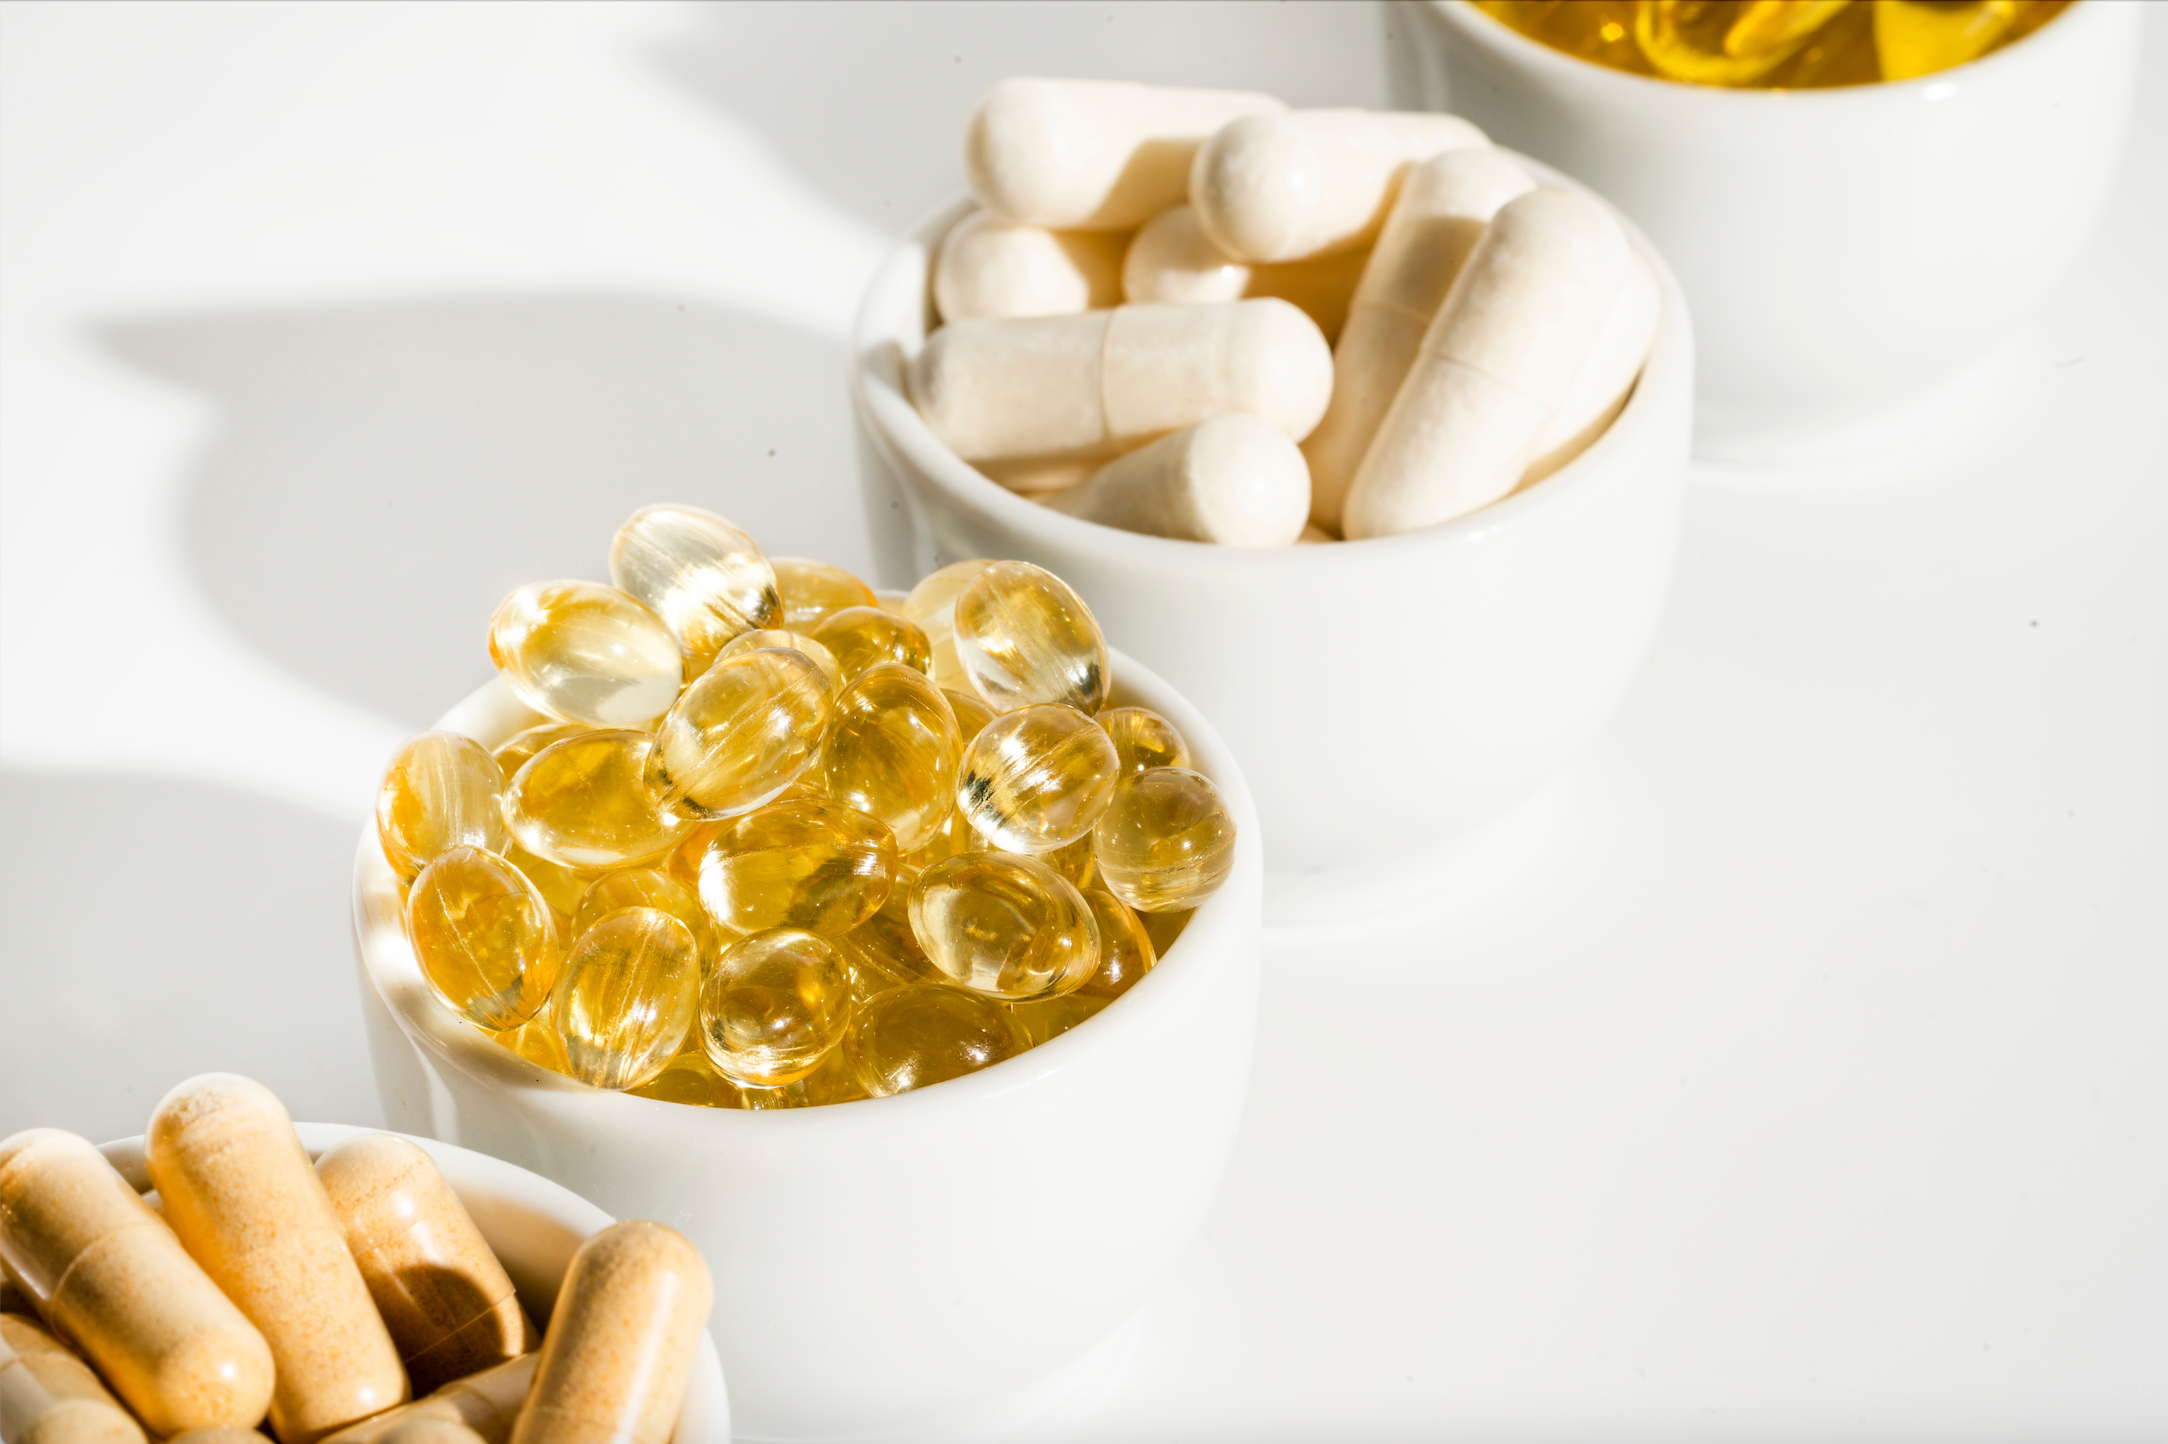 Ingredients matter. Your 5-step buying guide to children's supplements.